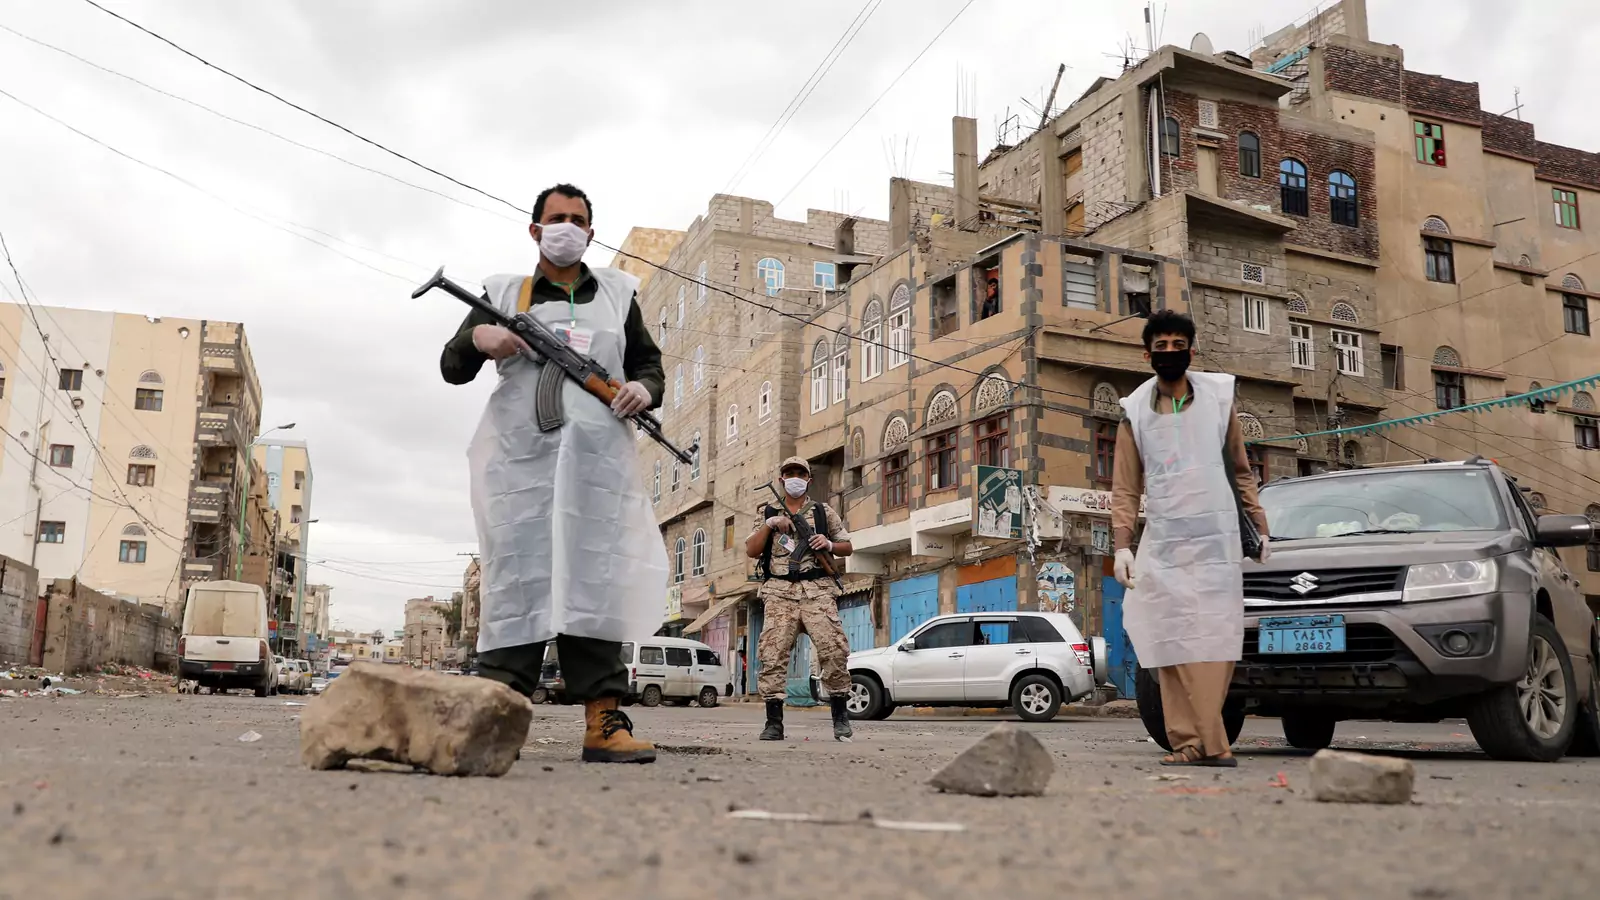 Security men wearing protective masks stand on a street during a twenty-four hour curfew that was instituted over concerns about the spread of the novel coronavirus in Sanaa, Yemen, on May 6, 2020.